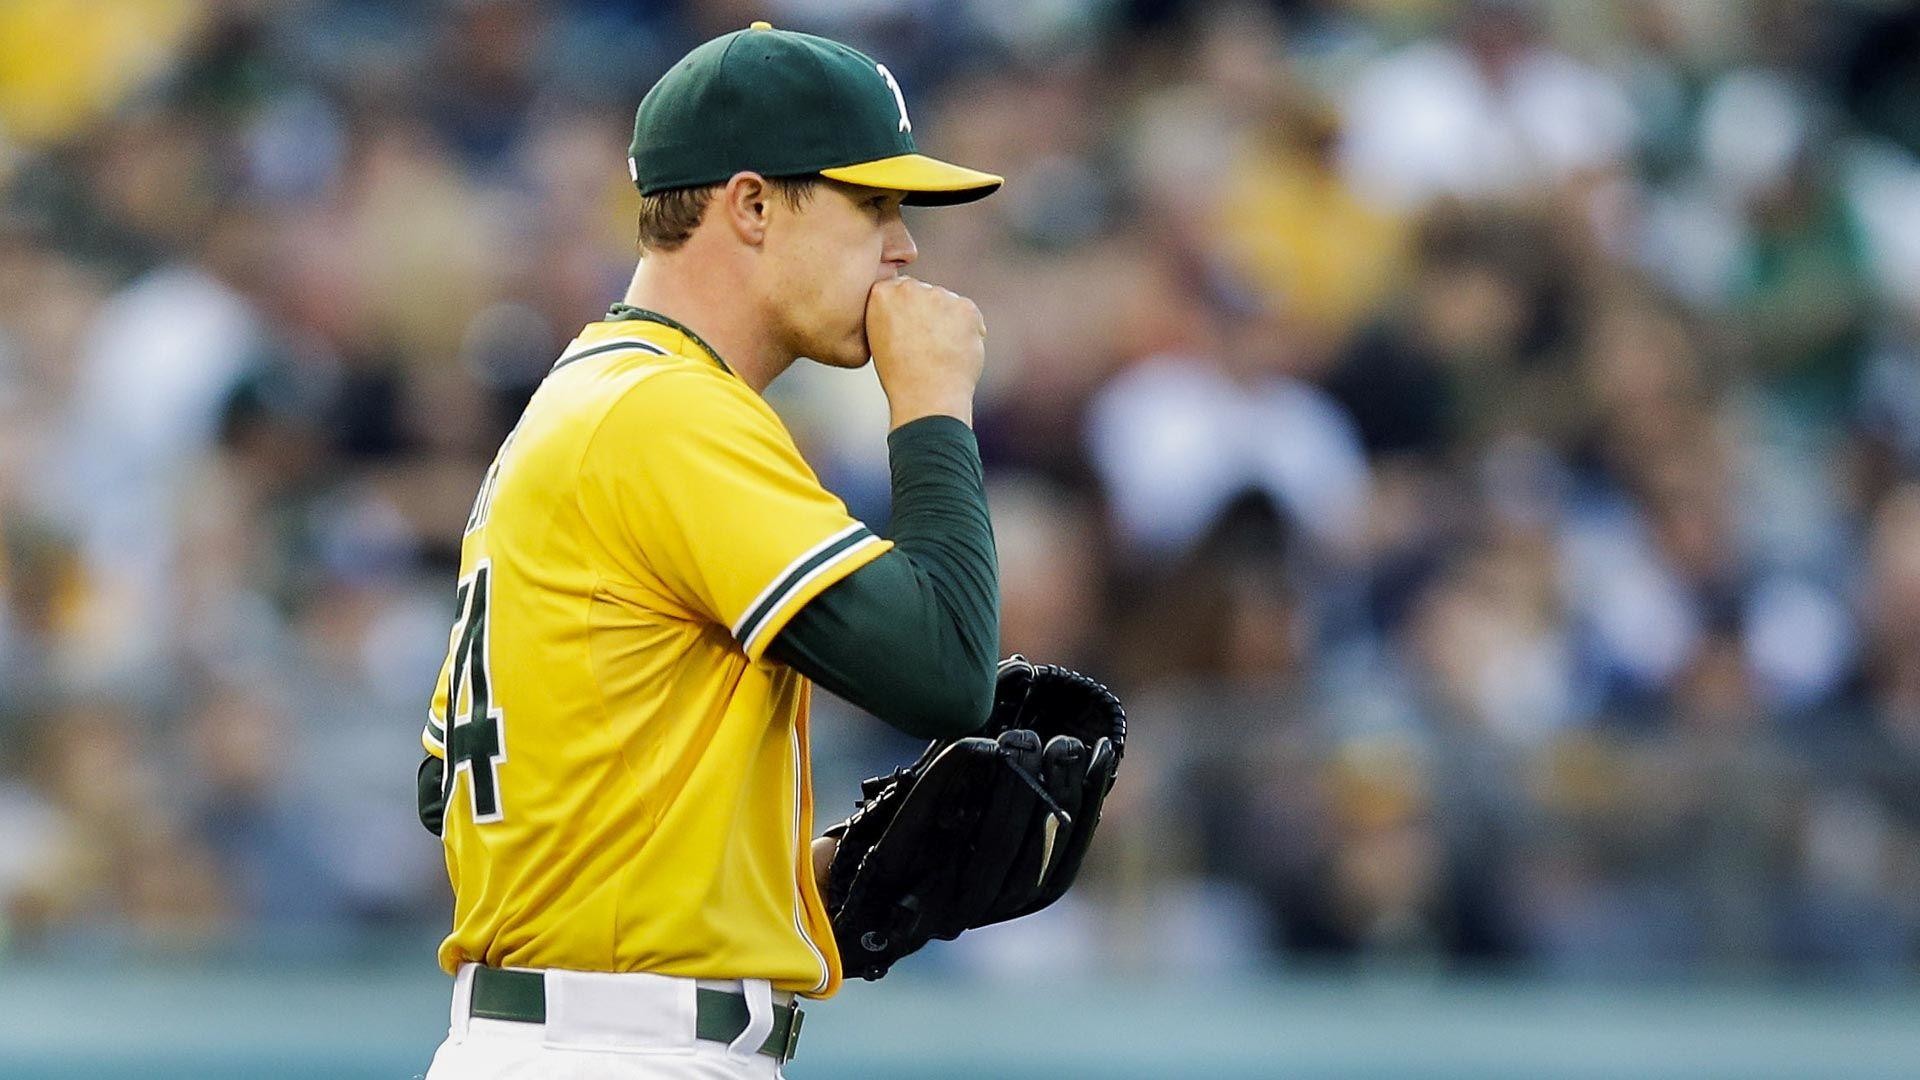 1920x1080 Here's why A's ace Sonny Gray should change his approach | MLB .